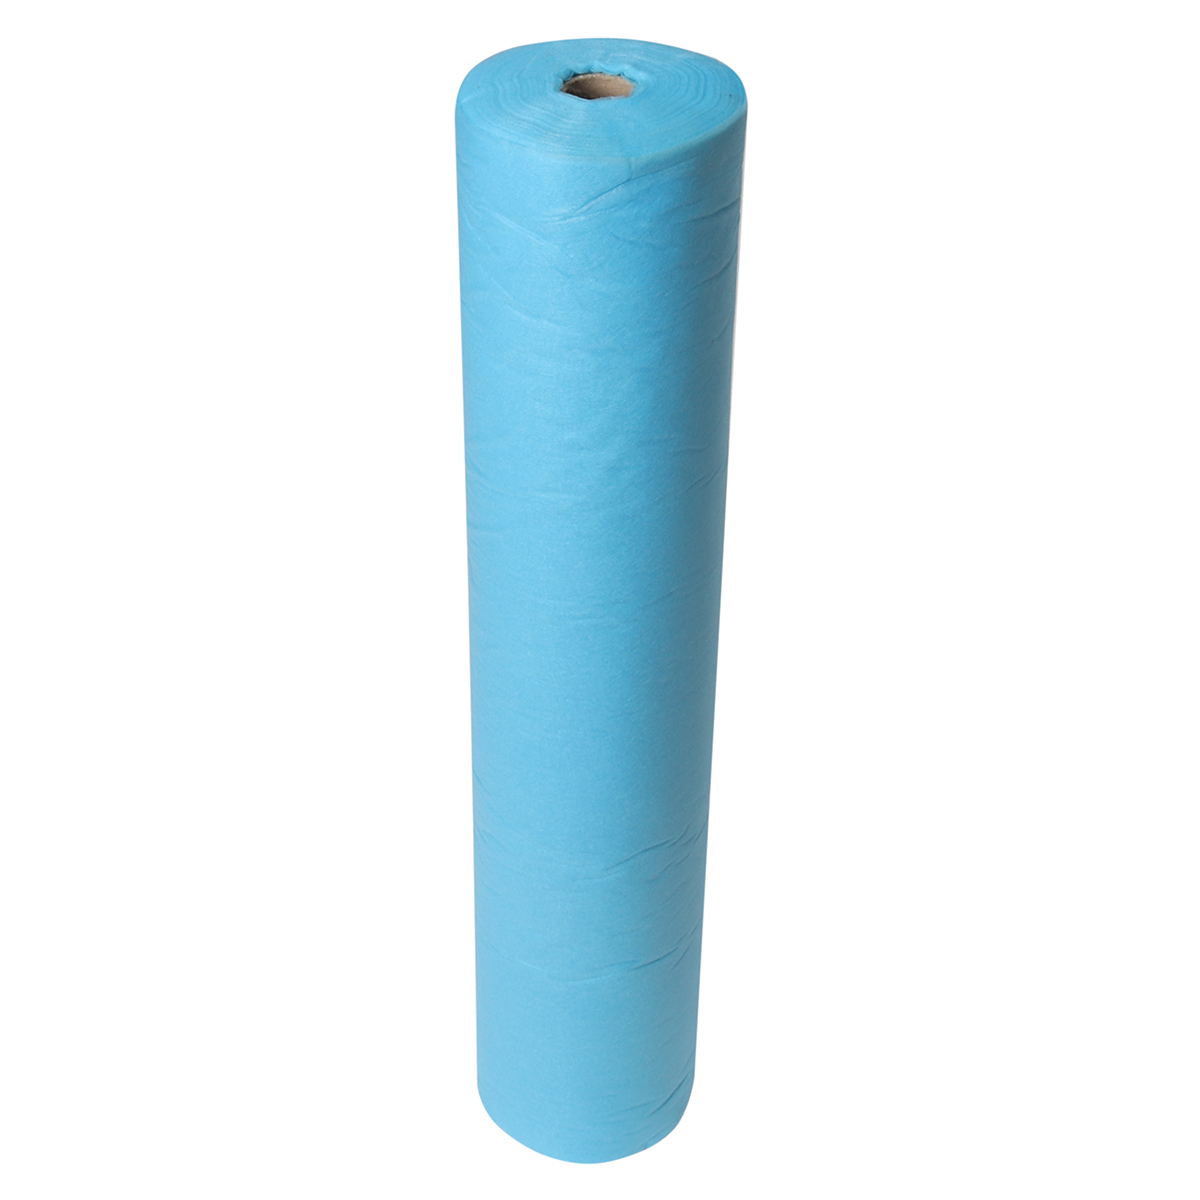 180x80cm-50PcsRoll-Disposable-Massage-Table-Bed-Cover-Sheet-Beauty-Waxing-1737148-4